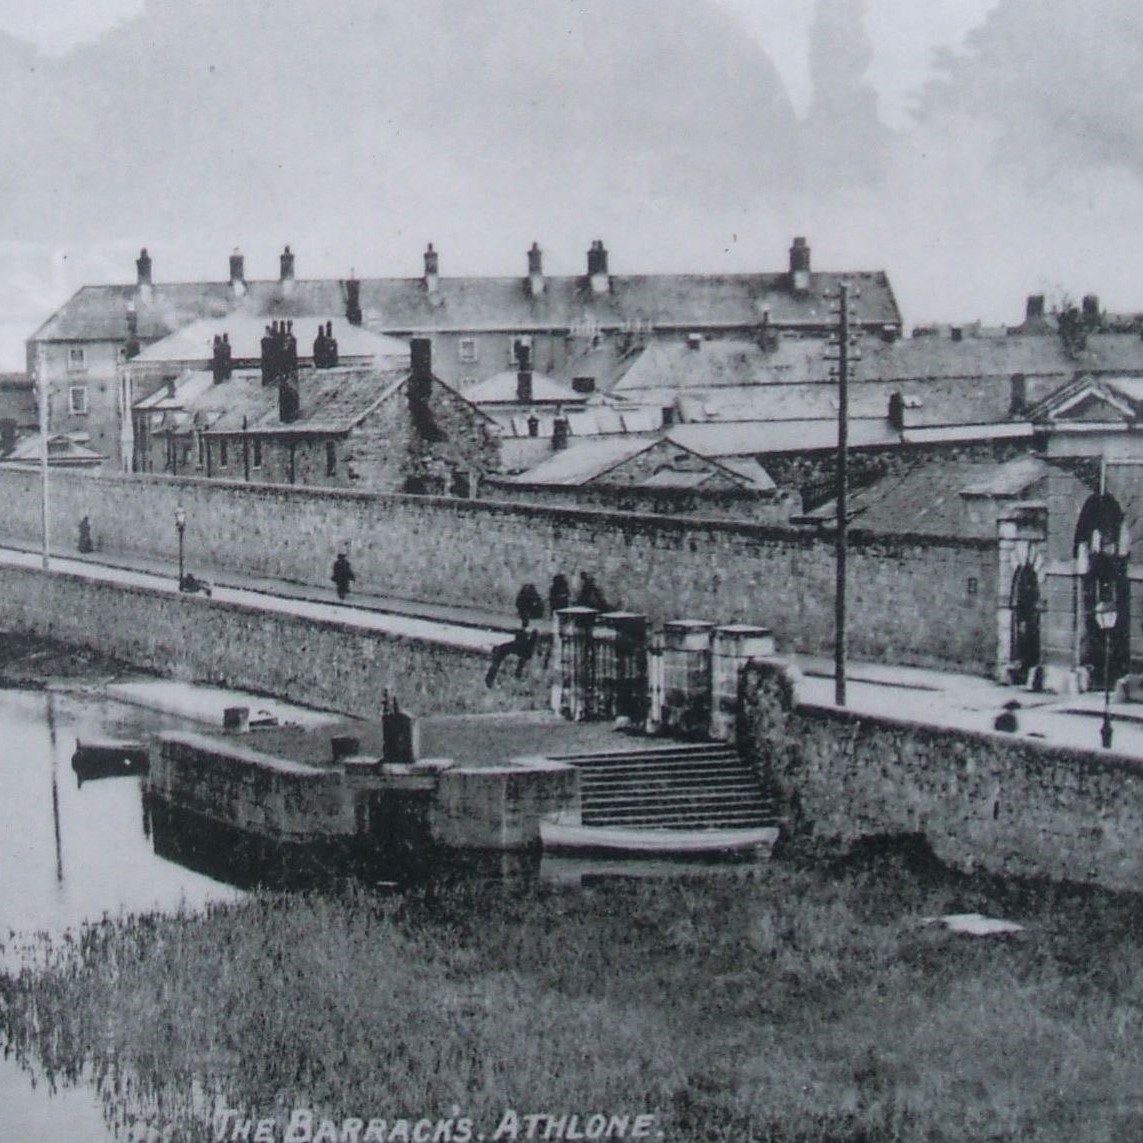 Image of the place where the execution of Galway men in Athlone took place.